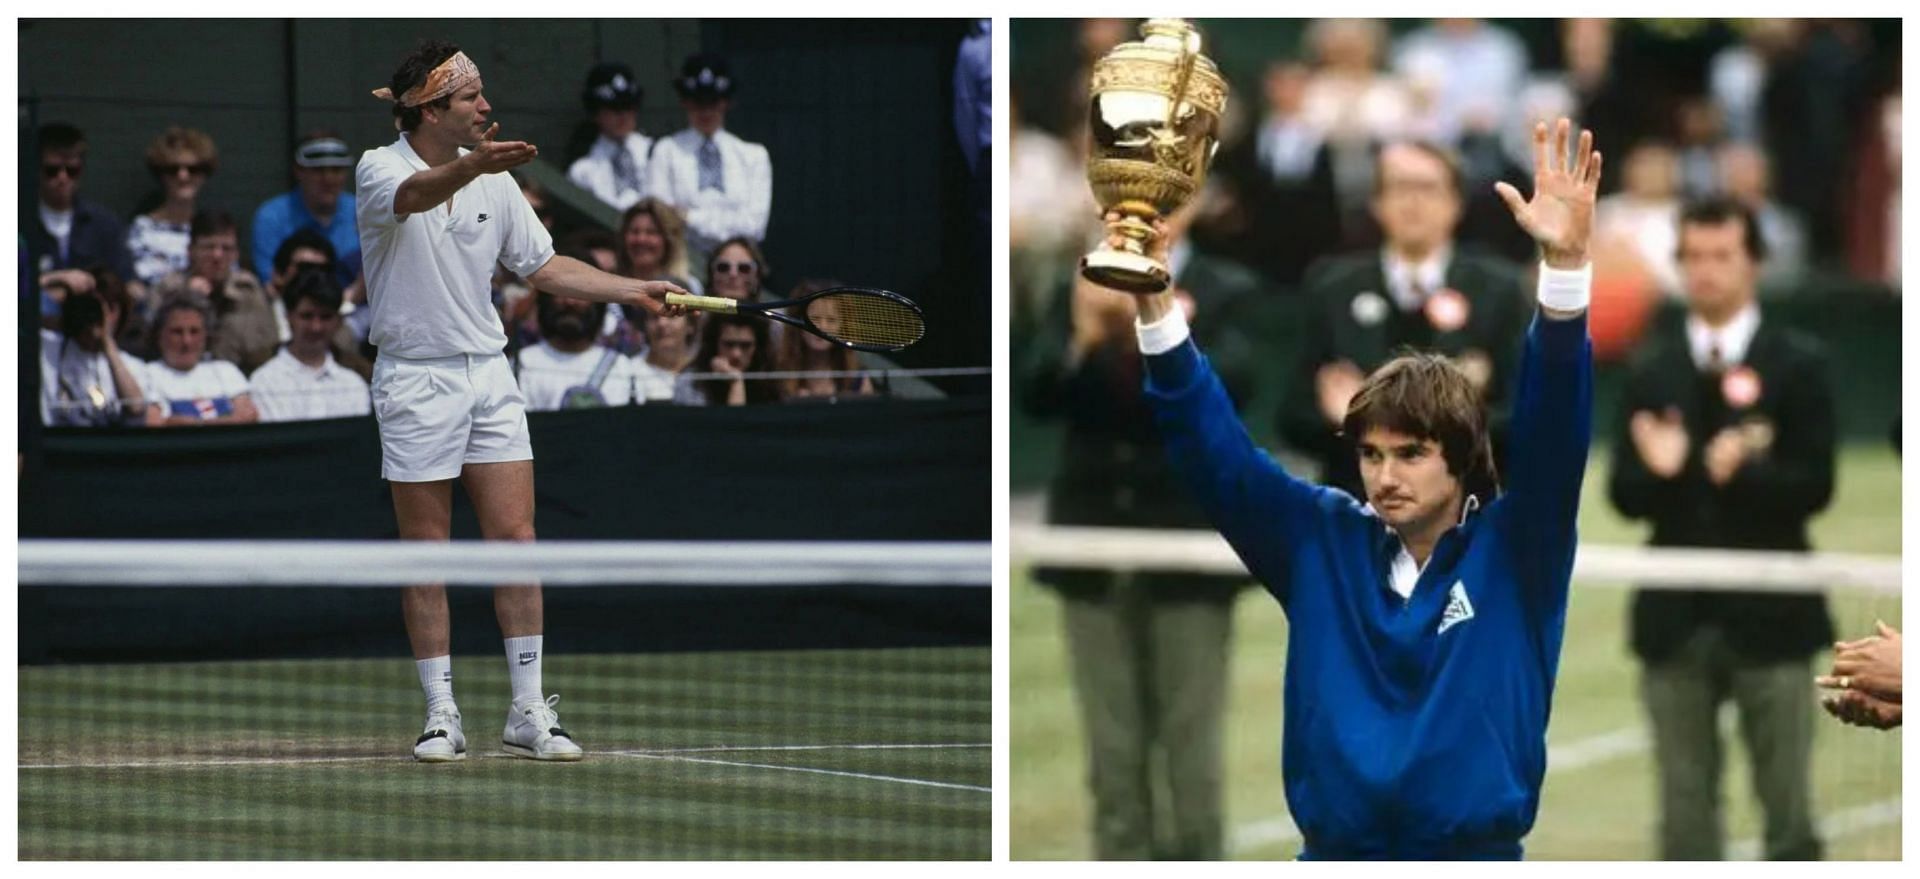 Connors and McEnroe played other 34 times during their illustrious careers